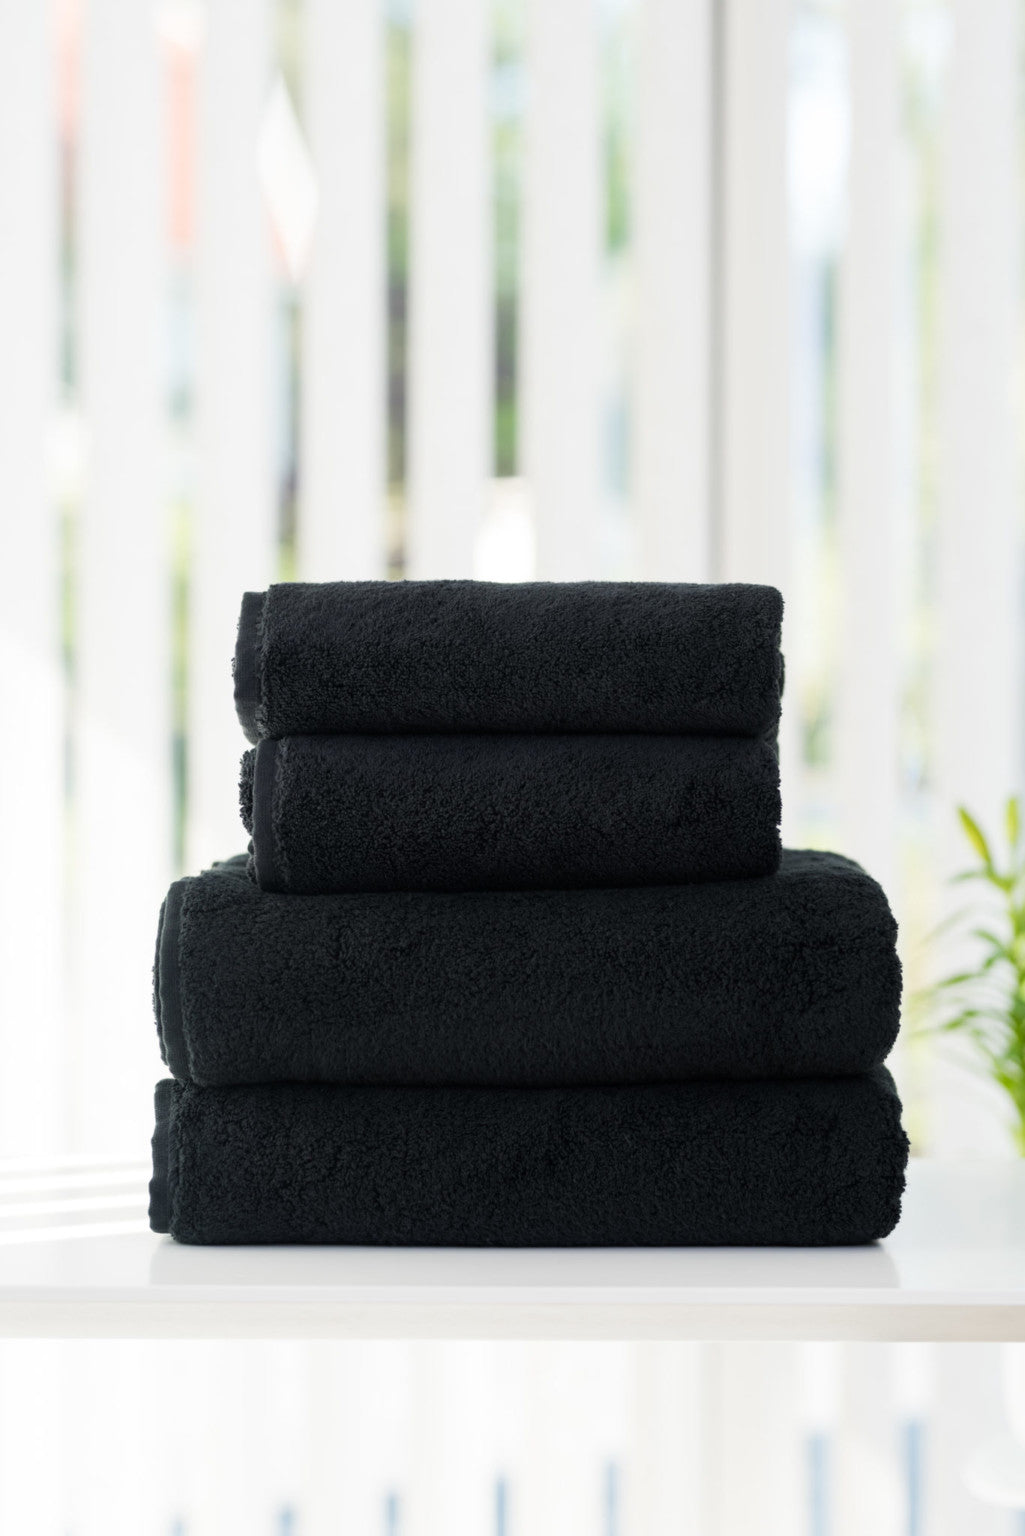 Luin Living Towels, Black, 4 different sizes